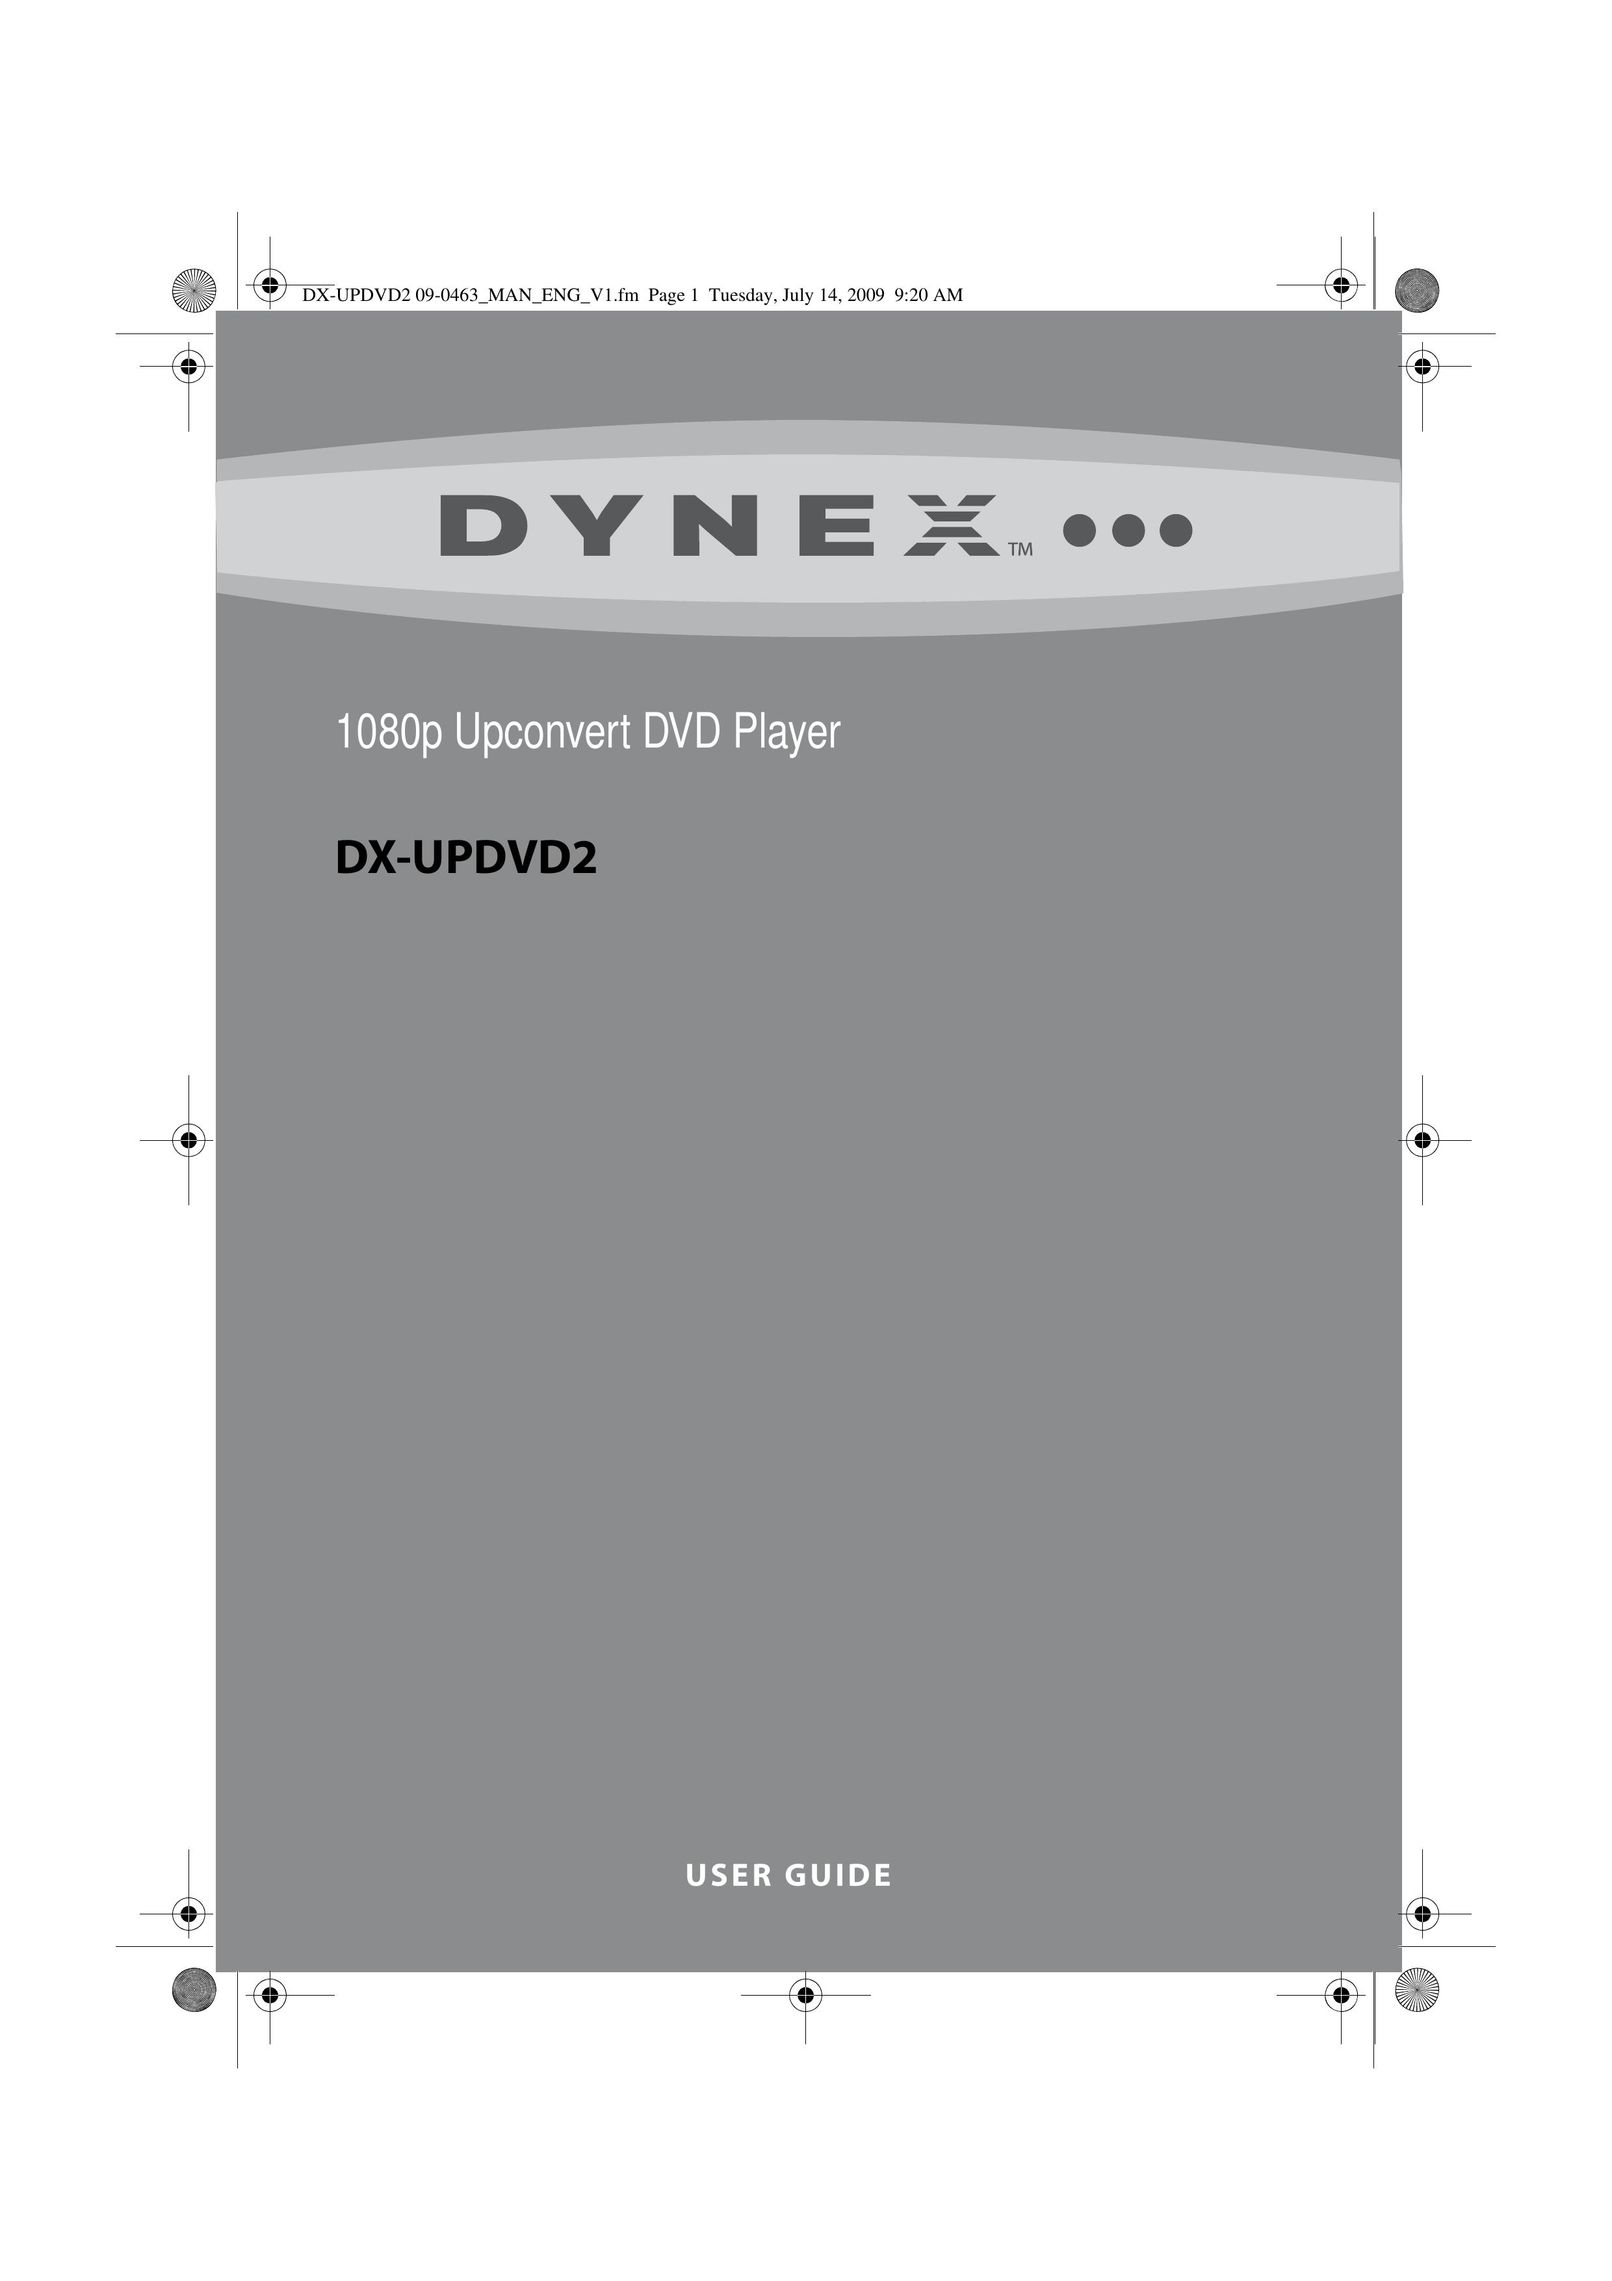 Dynex DX-UPDVD2 DVD Player User Manual (Page 1)